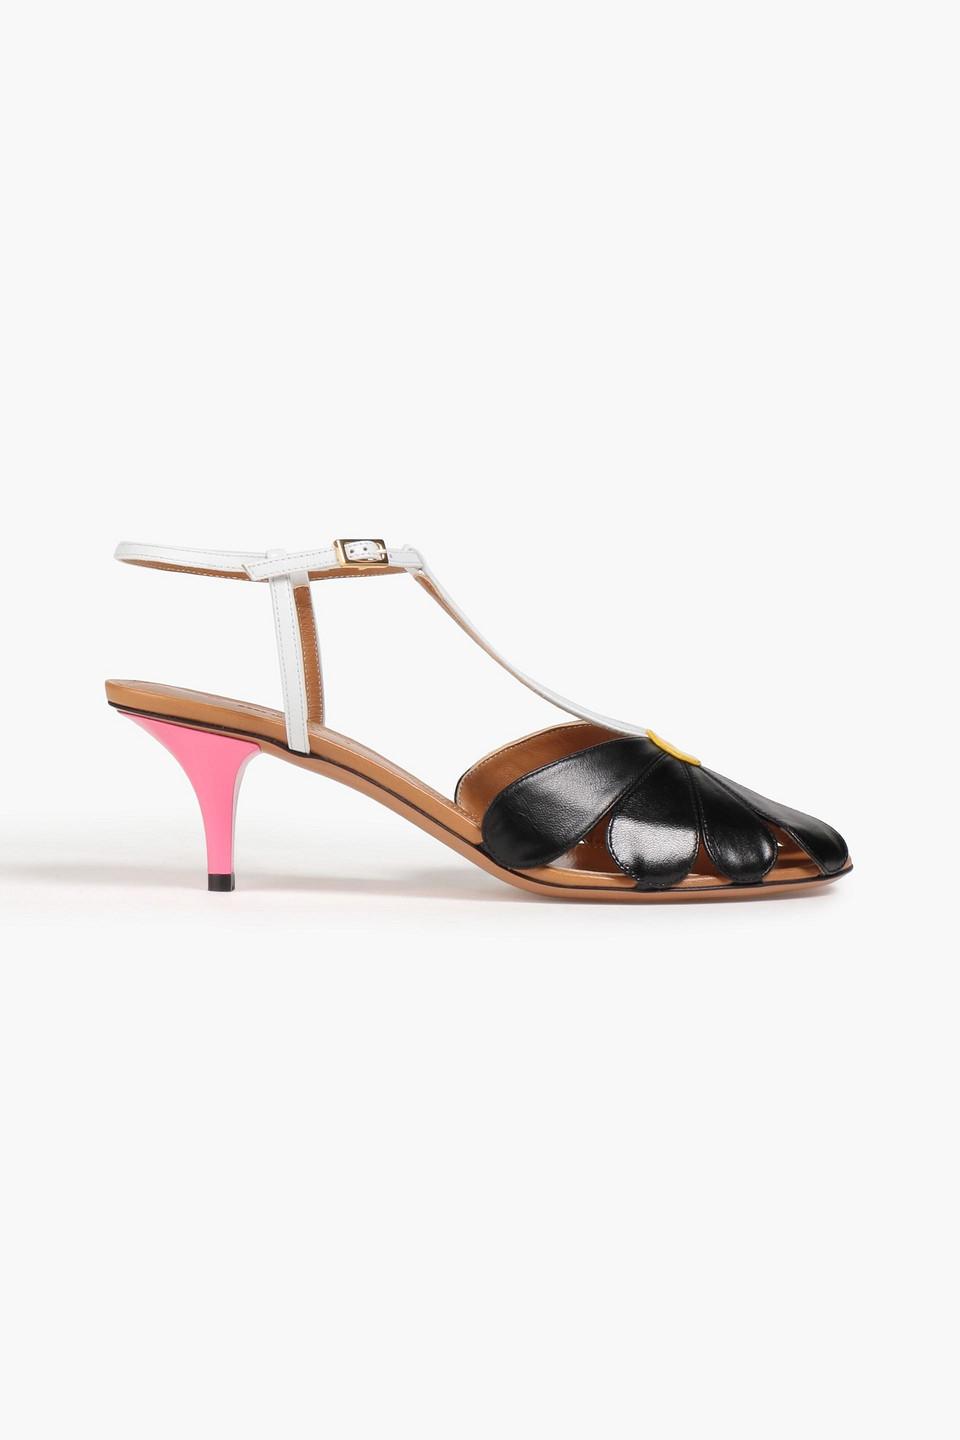 Marni Cutout Color-block Leather Pumps in Black | Lyst